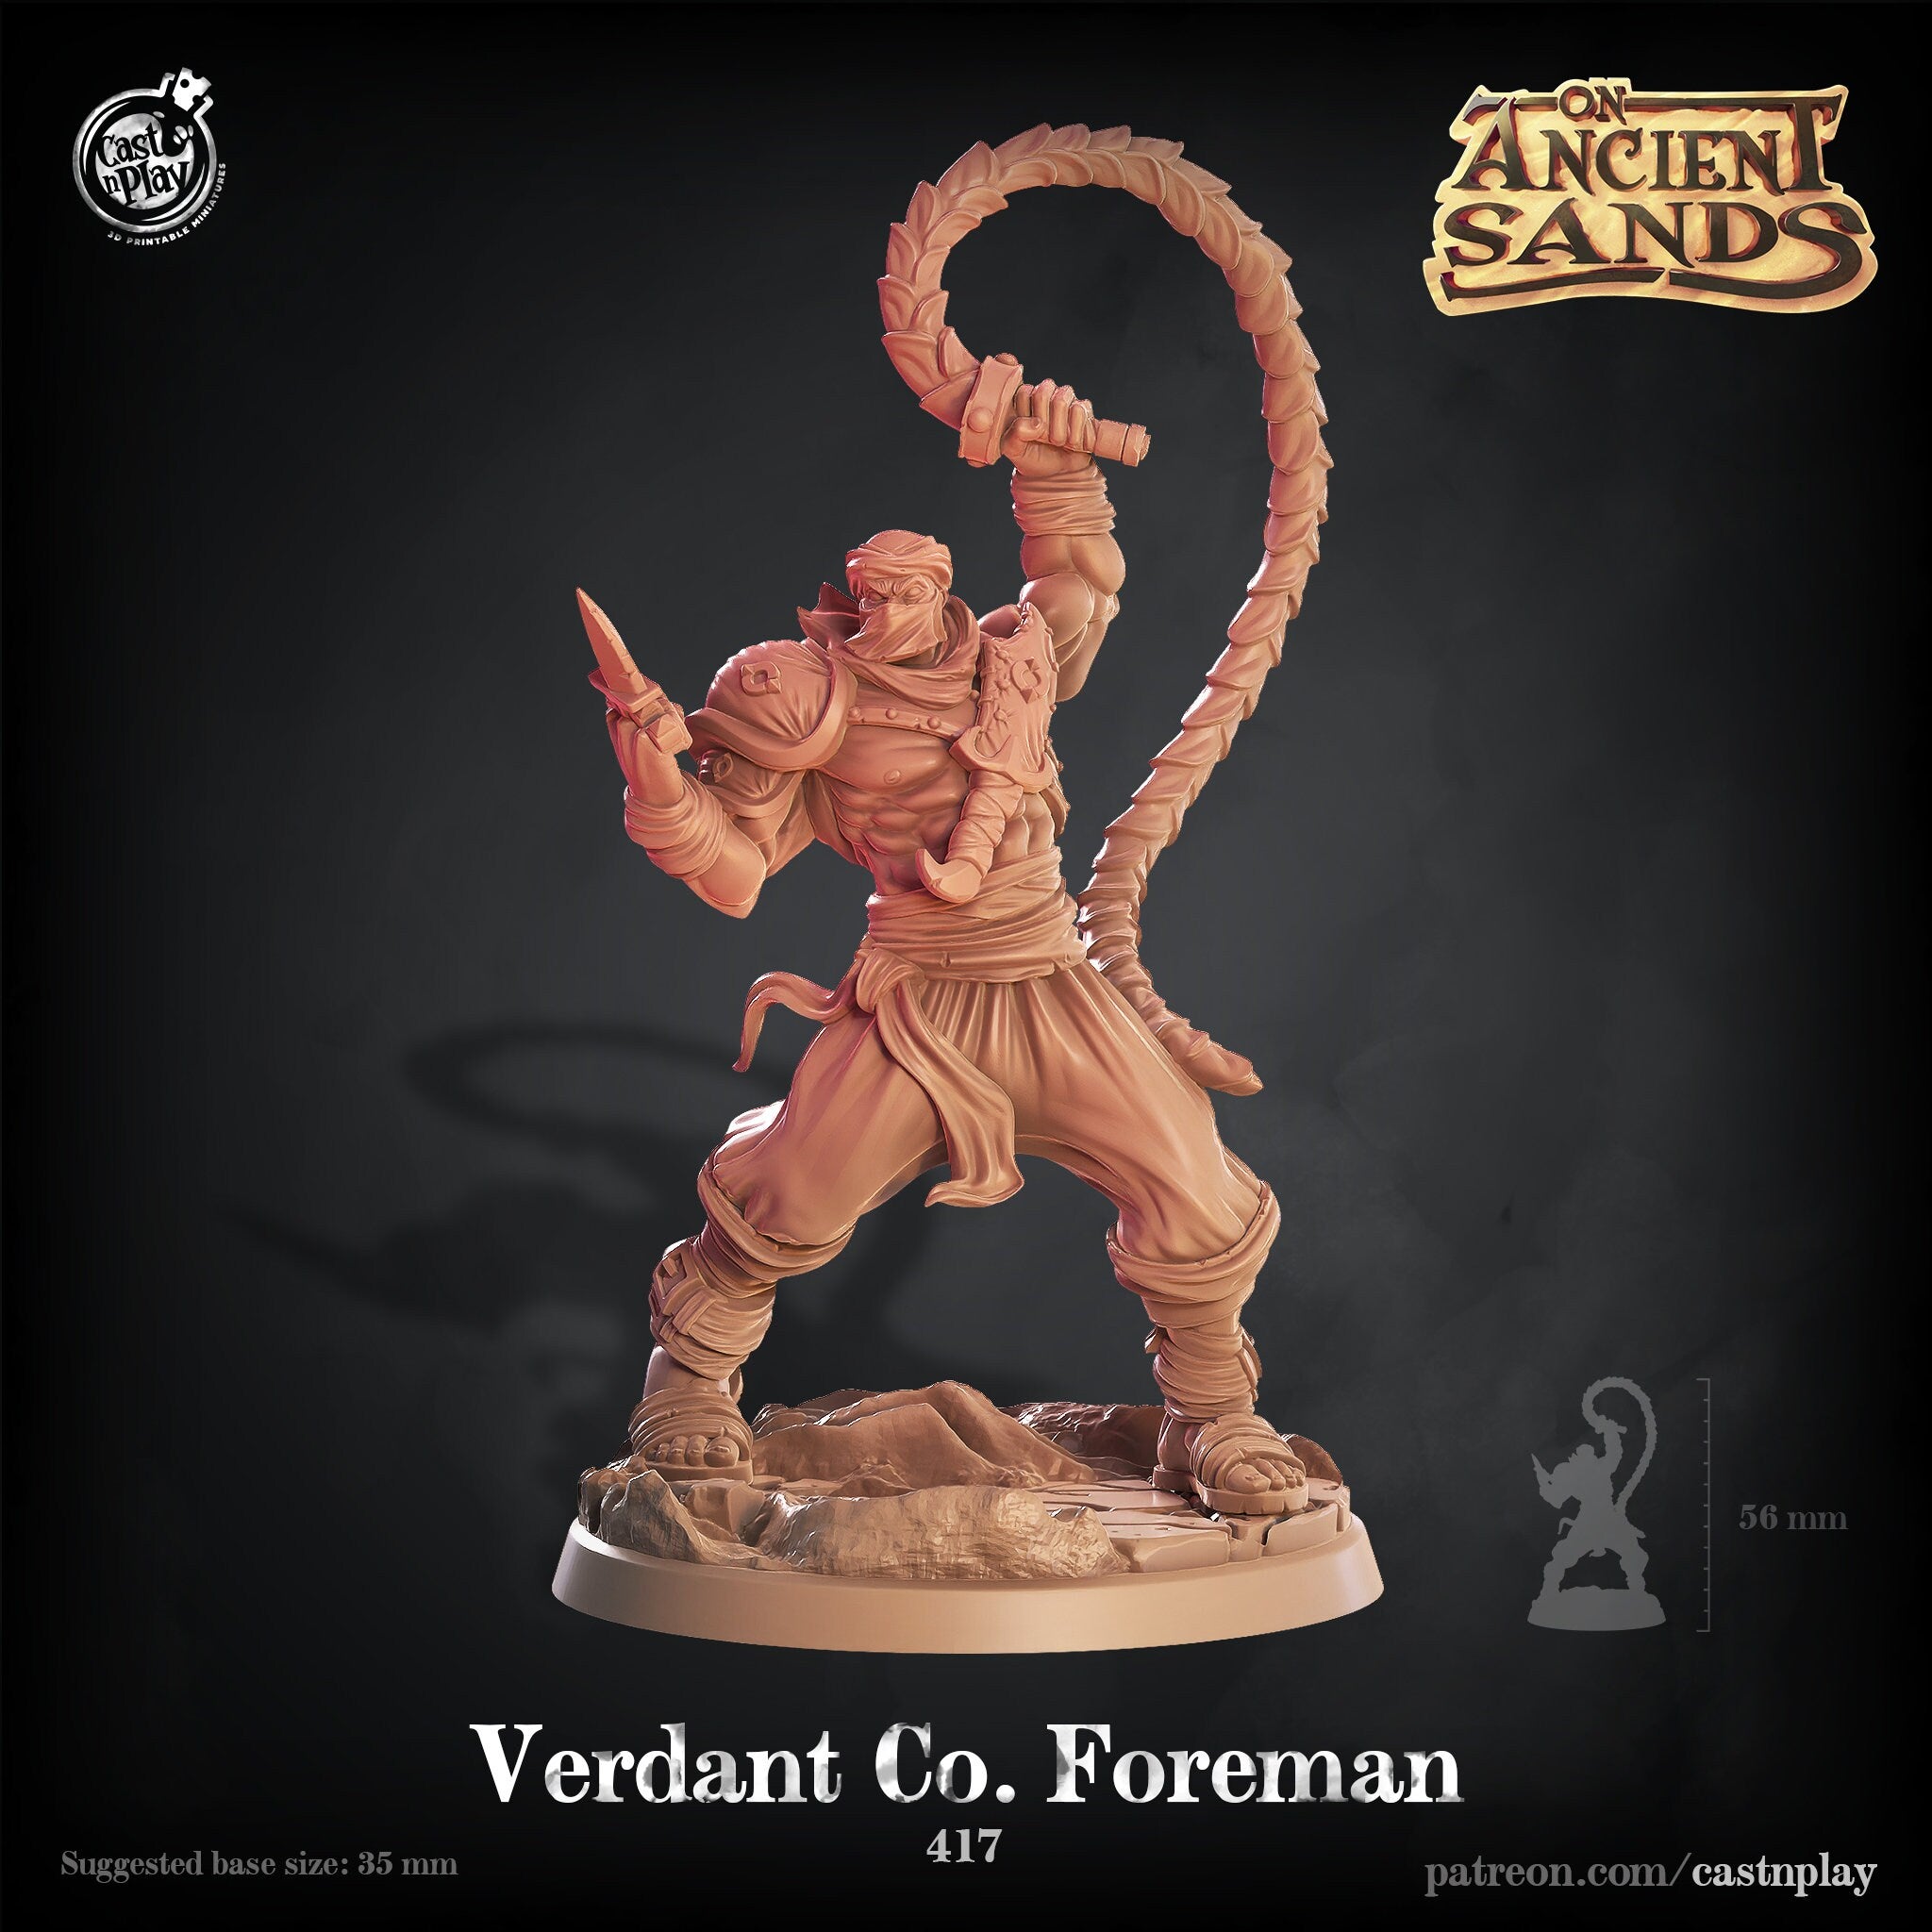 Verdant Co.  Foreman by Cast N Play (On Ancient Sands)